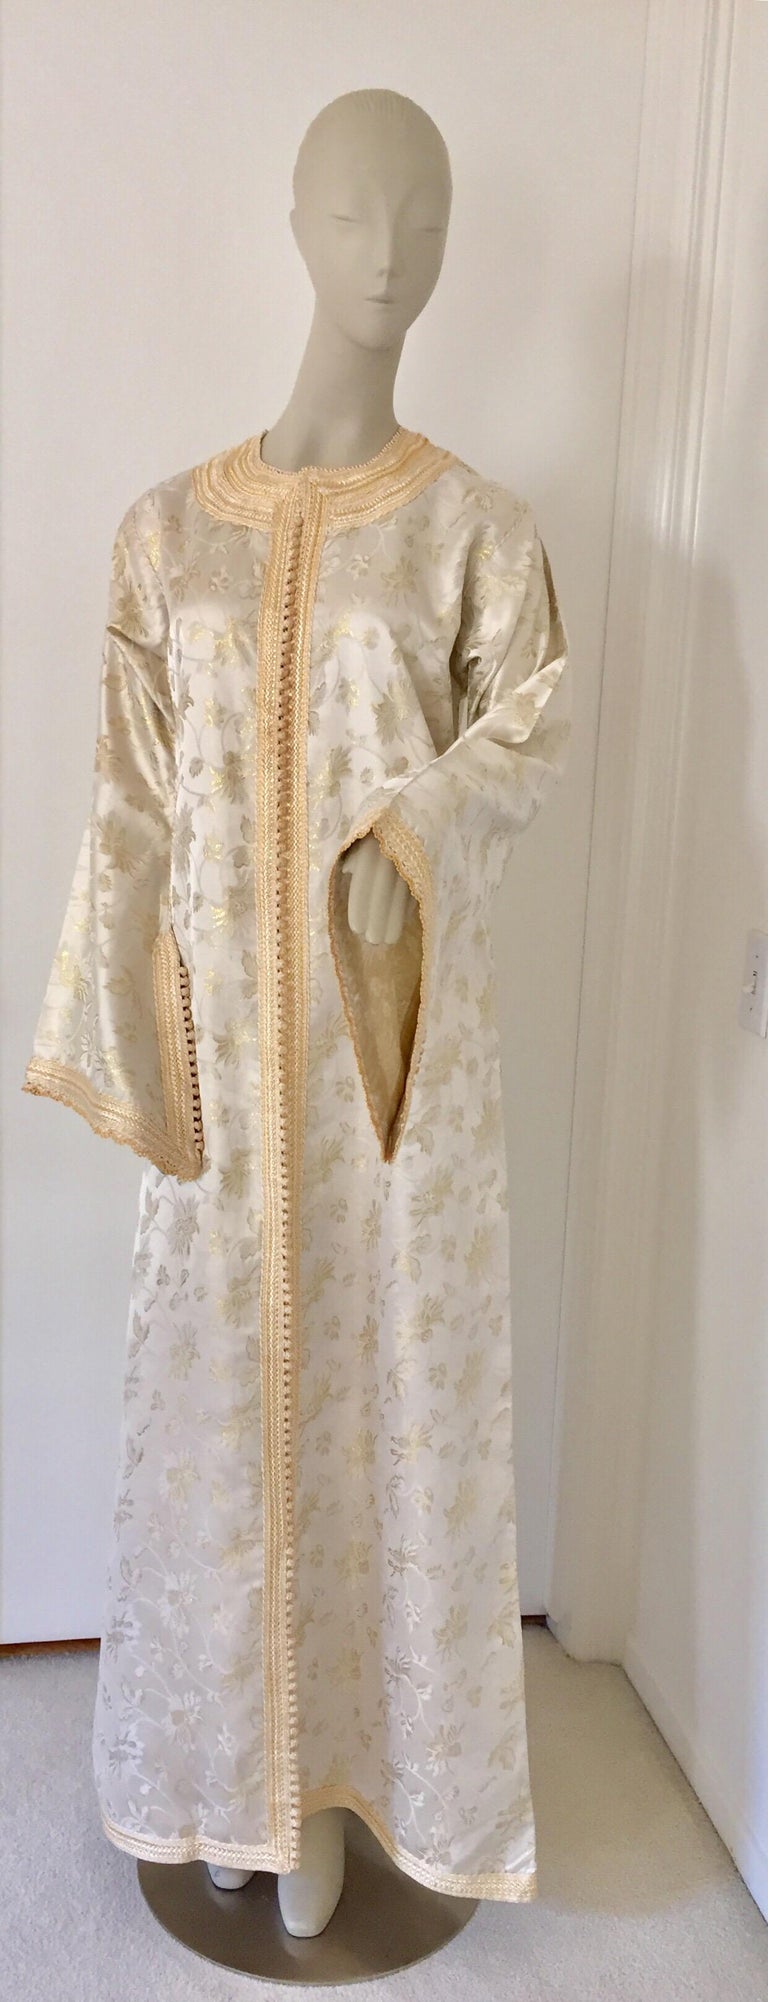 Bohemian Vintage Moroccan Kaftan White and Gold Metallic Floral Brocade For Sale